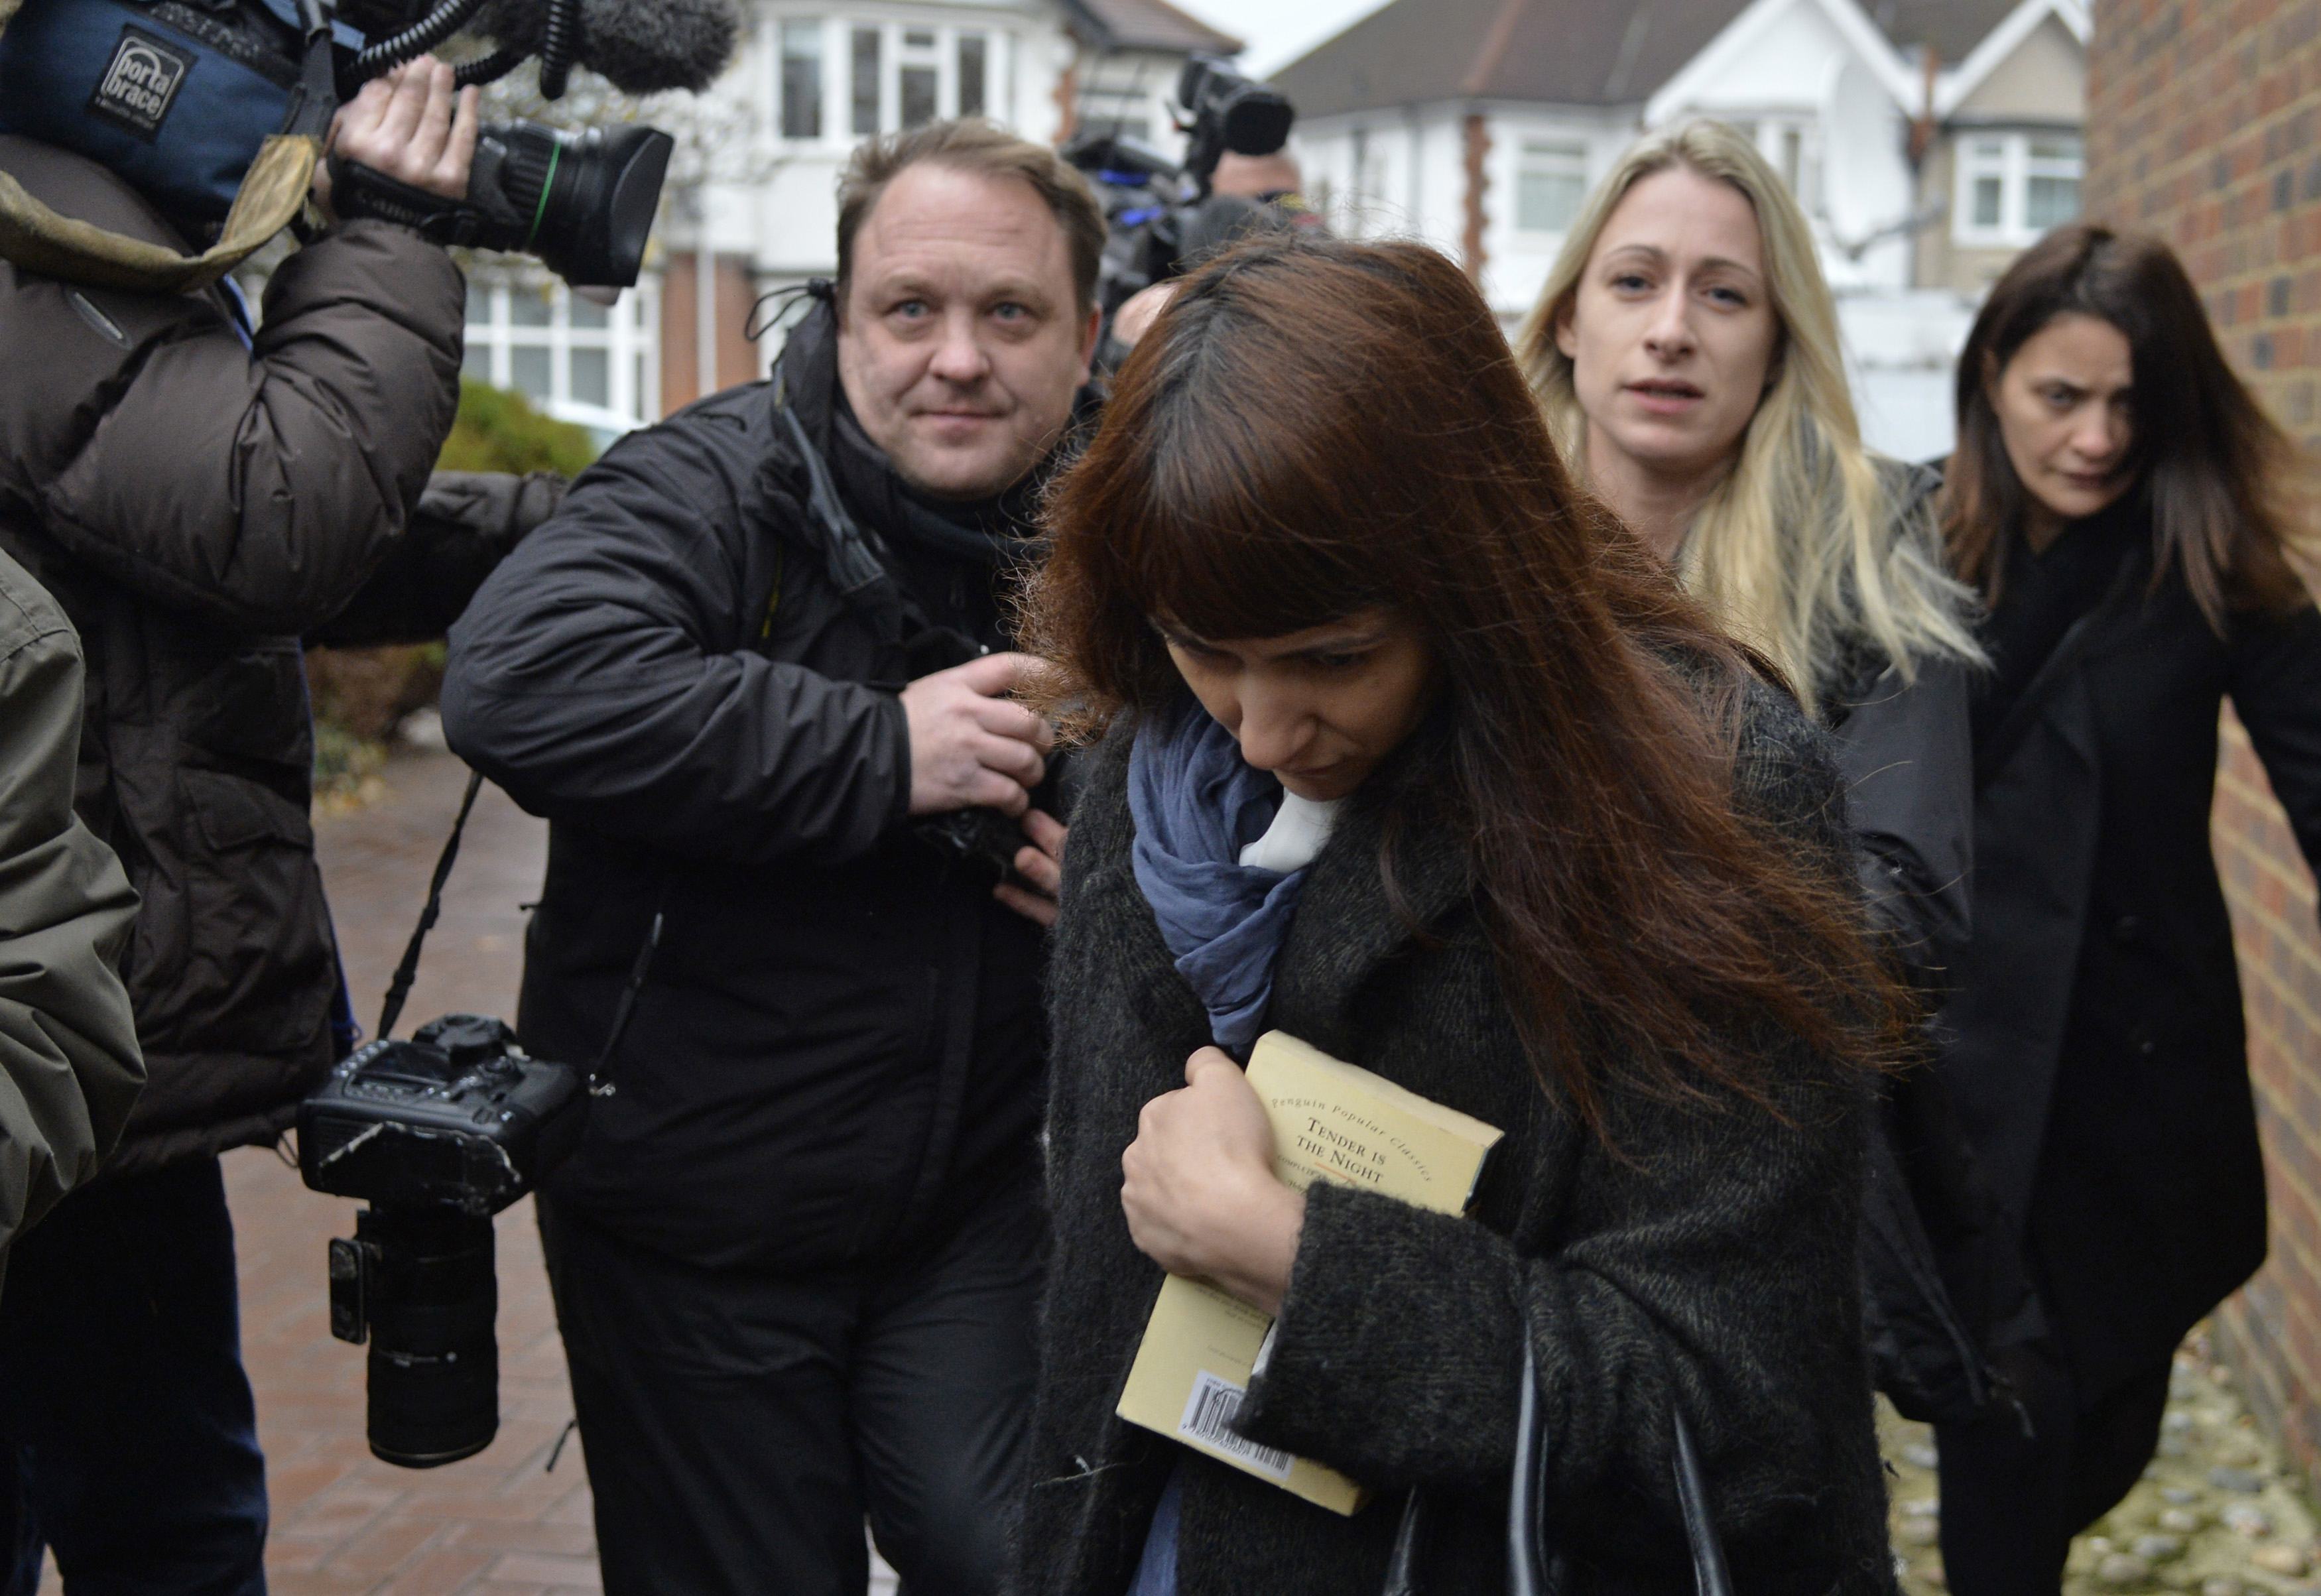 Italian sisters Elisabetta (right) and Francesca (centre) Grillo are surrounded by members of the media as they arrive at Isleworth Crown Court in west London. Photo: Reuters